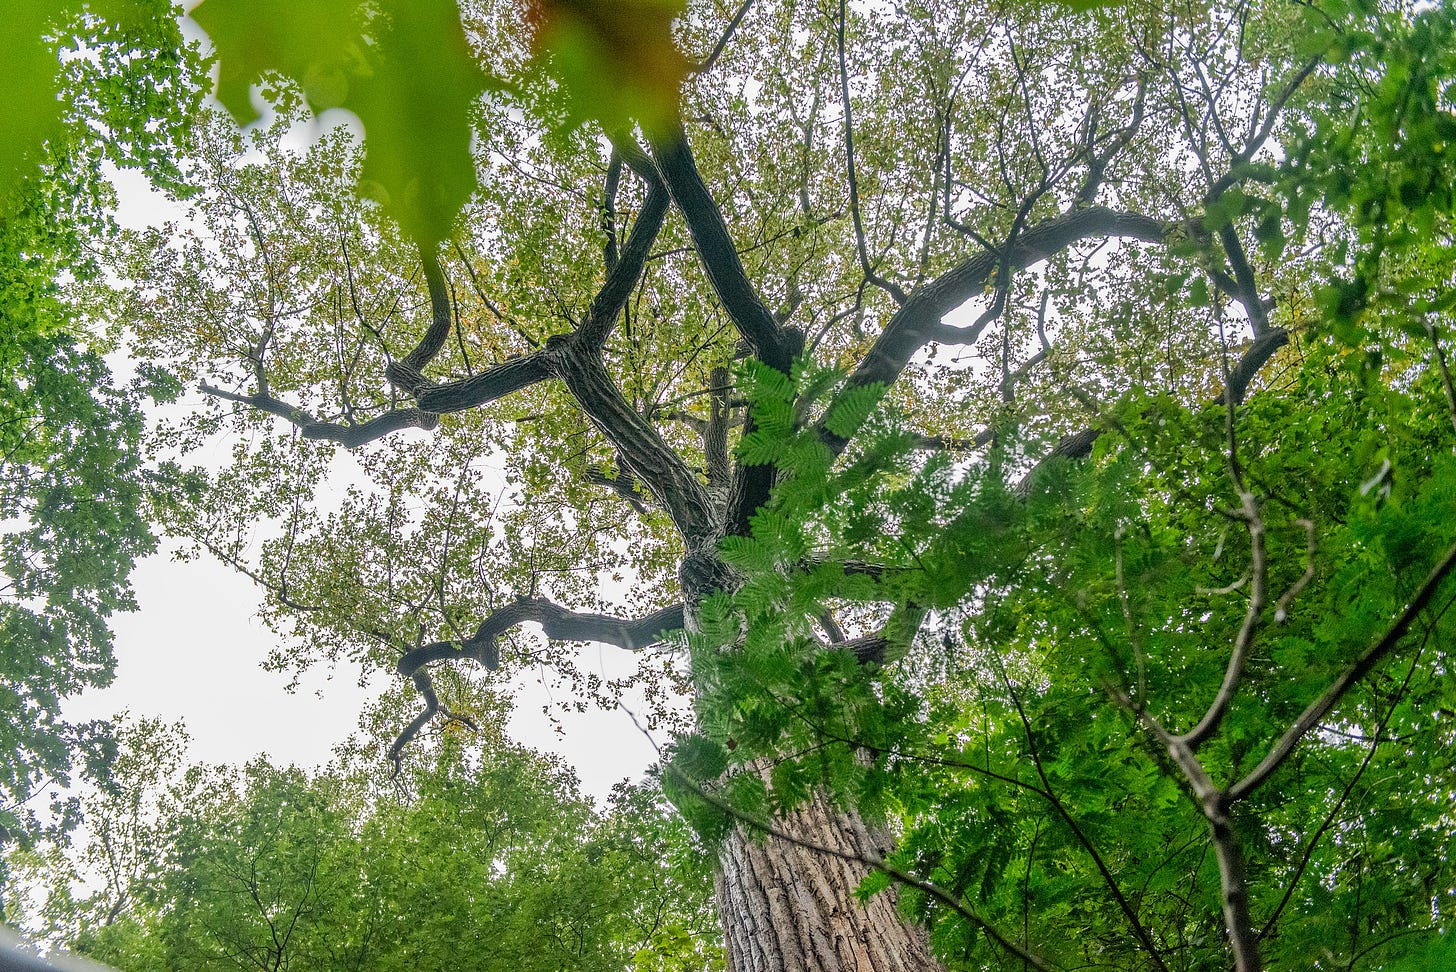 ID: Looking upward at the canopy of the Alley Pond Giant tree